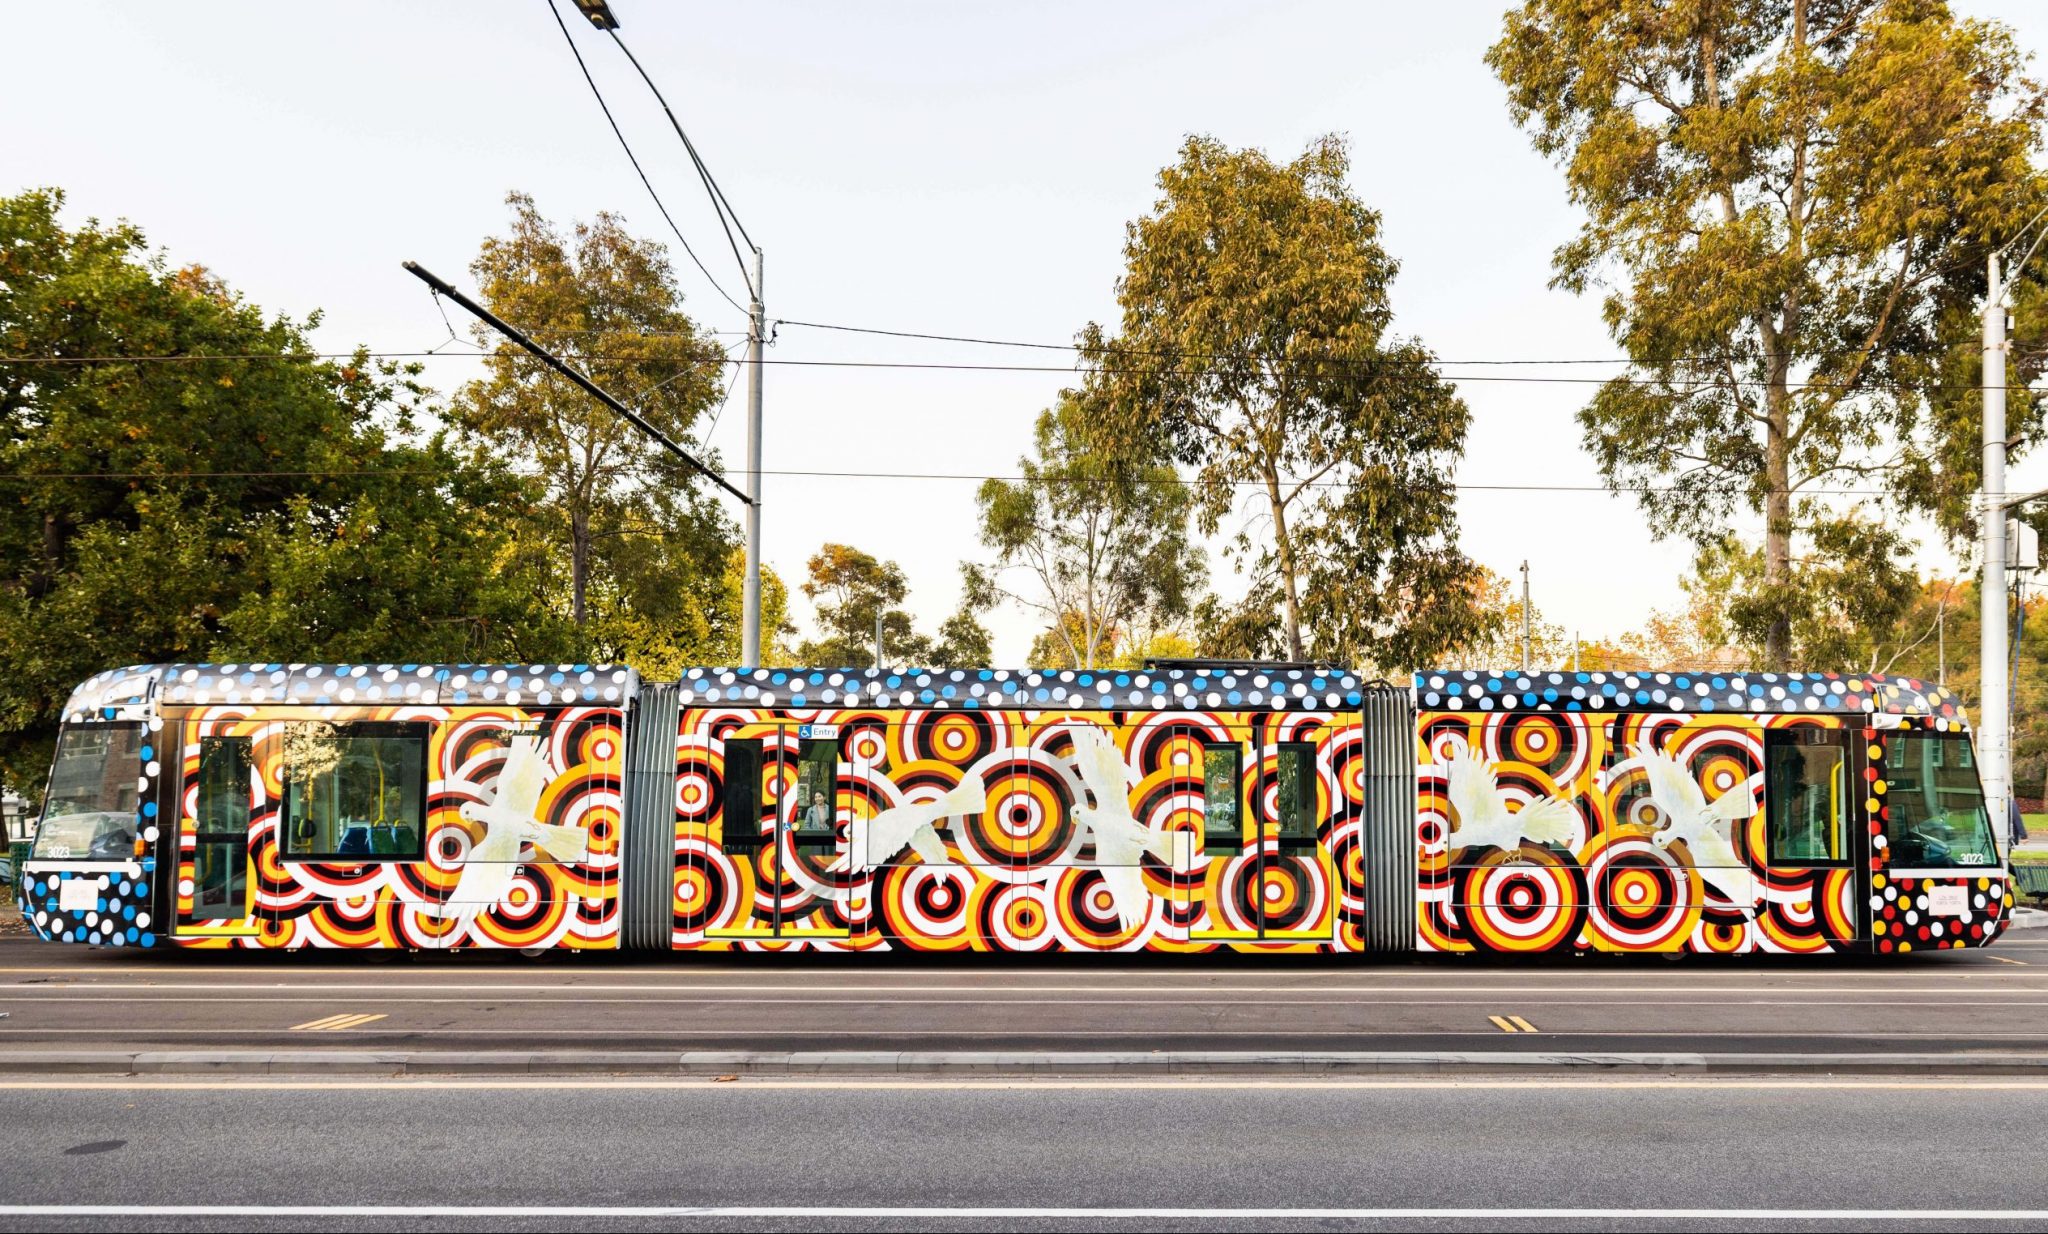 Melbourne’s First Nations-designed art trams have been unveiled for 2022